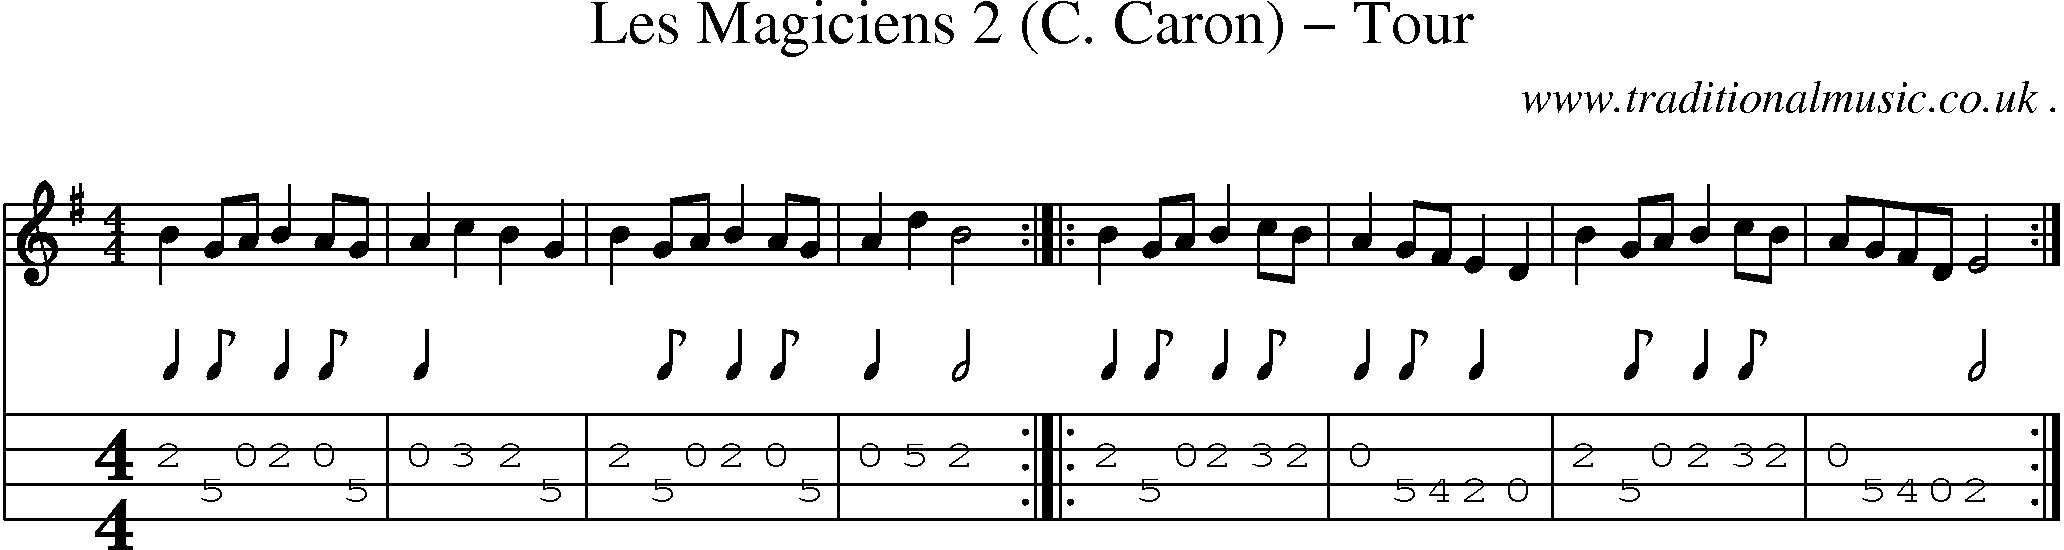 Sheet-Music and Mandolin Tabs for Les Magiciens 2 (c Caron) Tour